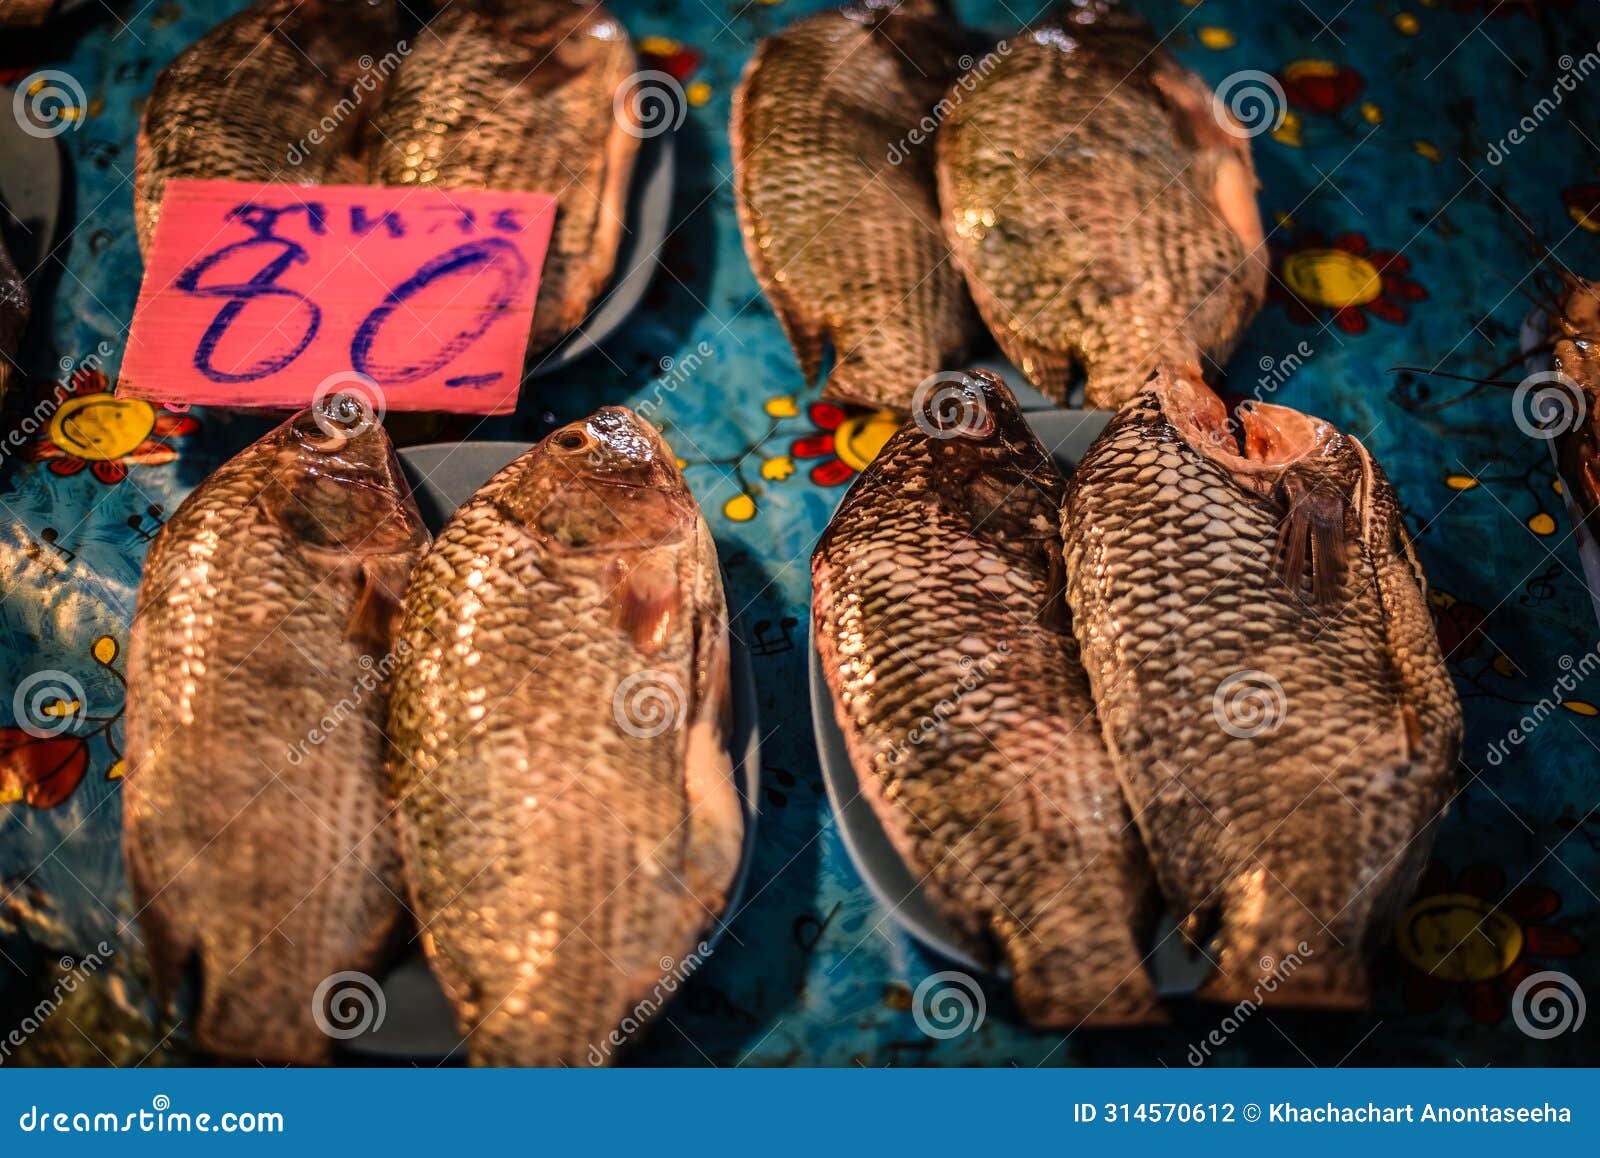 fresh tilapia are scaled, gutted and put on a plate for sale at a fresh market